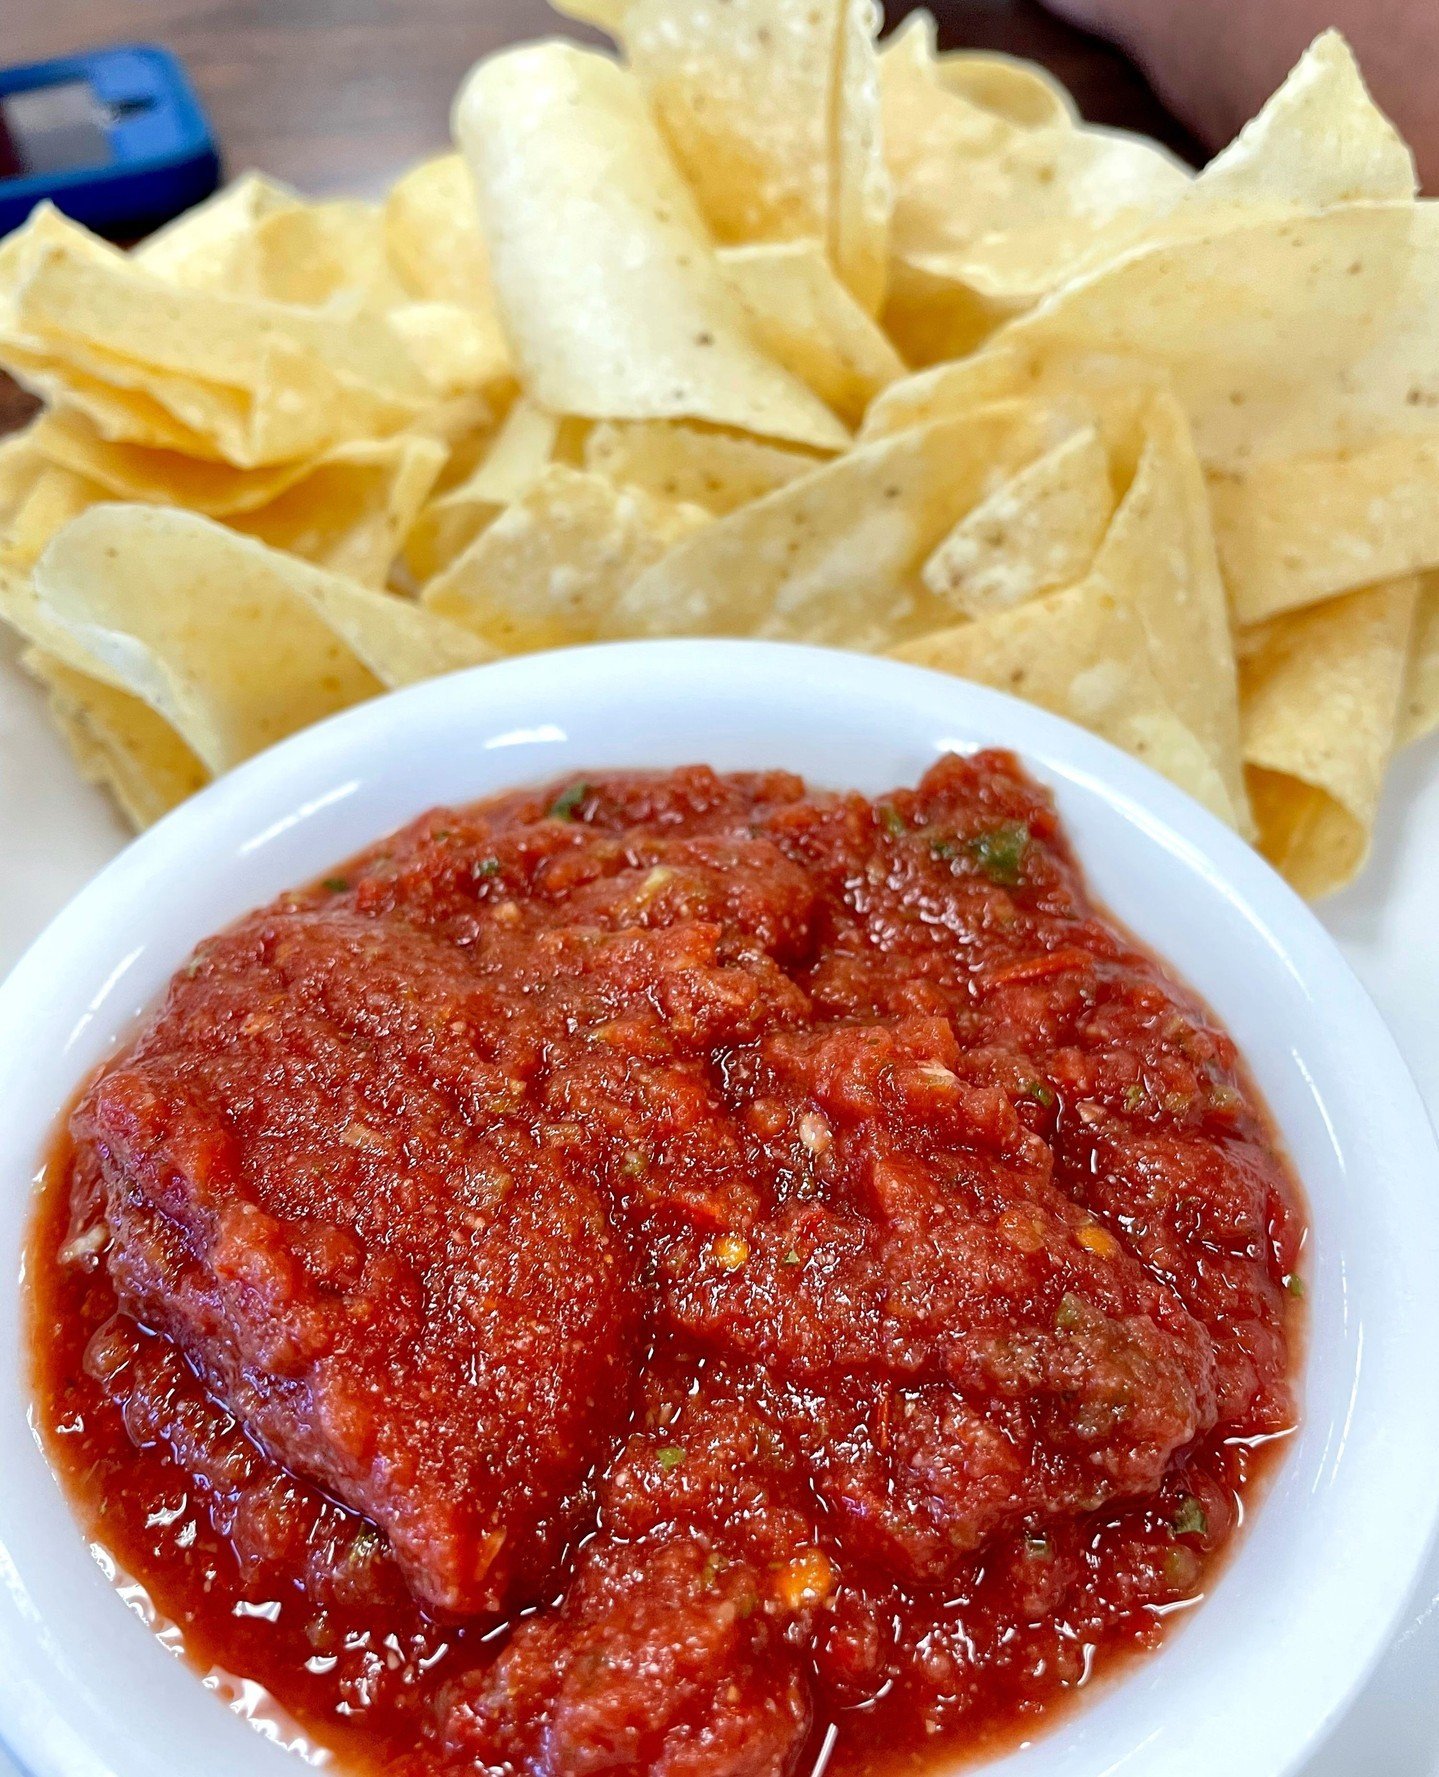 A little lunchtime pick-me-up, anyone?!🌶️ #homemadesalsa #wecks #wecksnm